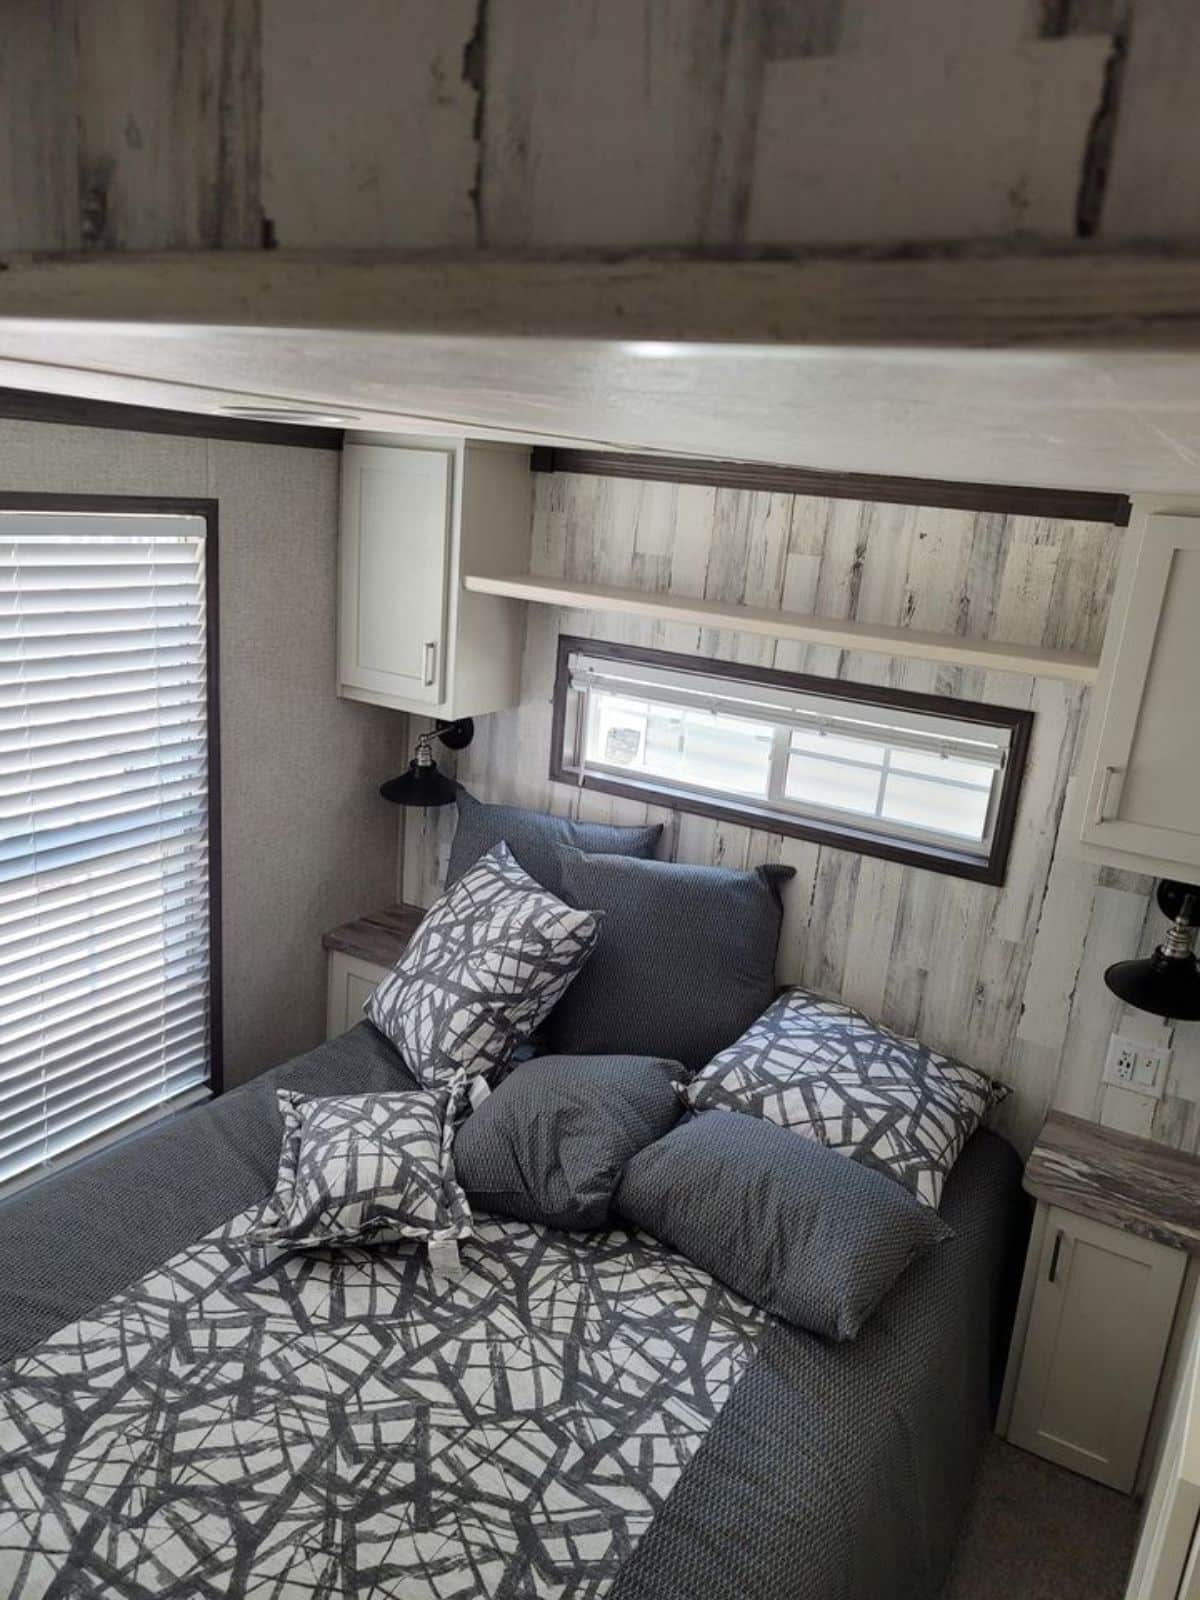 Bedroom of 2022 Park Model Tiny Home is comfortable with queen bed, side tables and still ample space